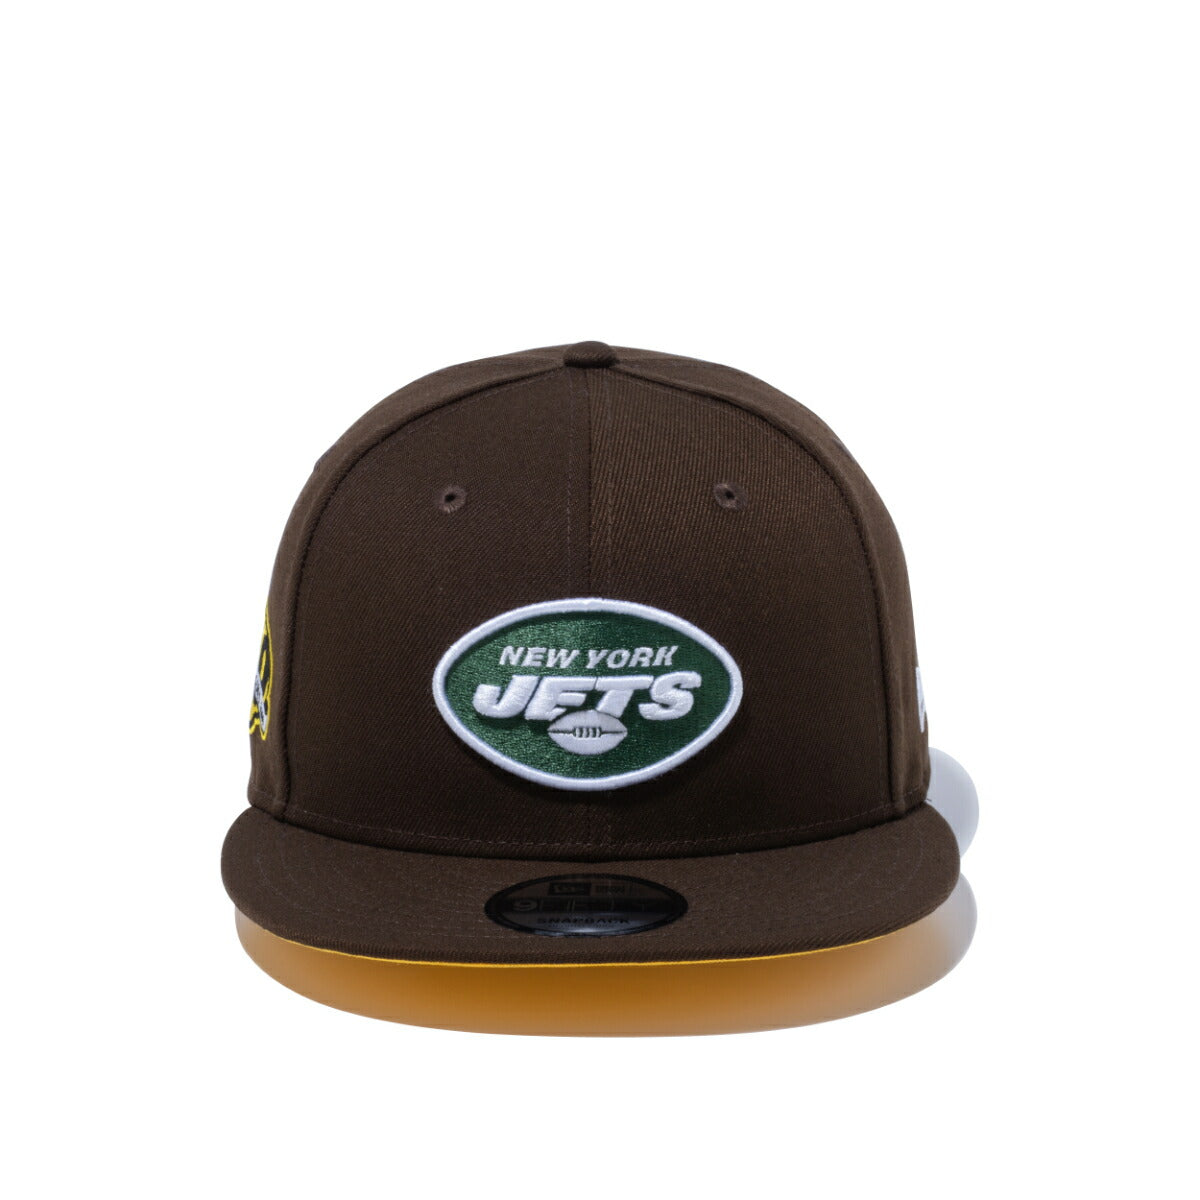 NFL NEW YORK JETS NYC YELLOW CAB 9FIFTY